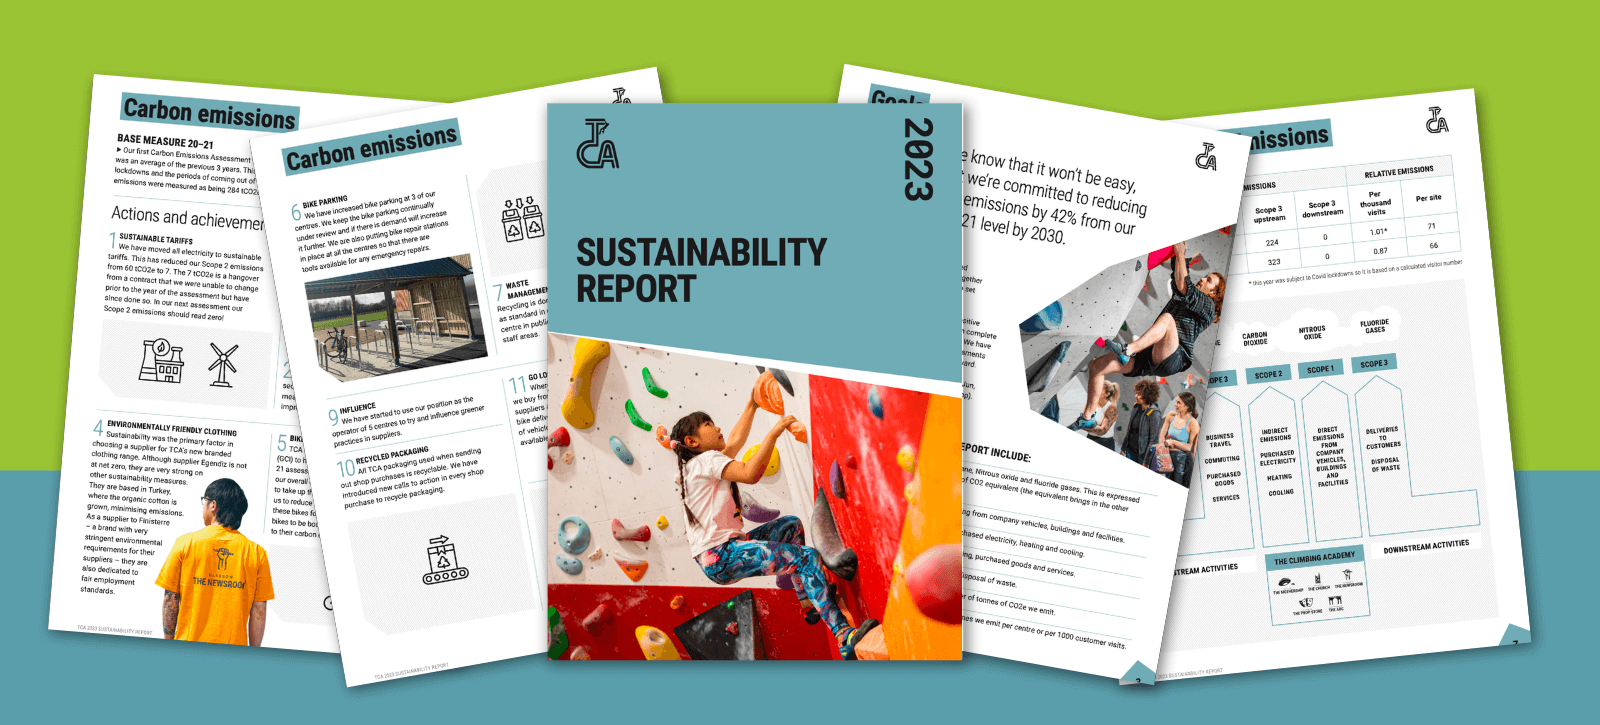 Screengrabs of TCA's sustainability report, including, text, images and tables.